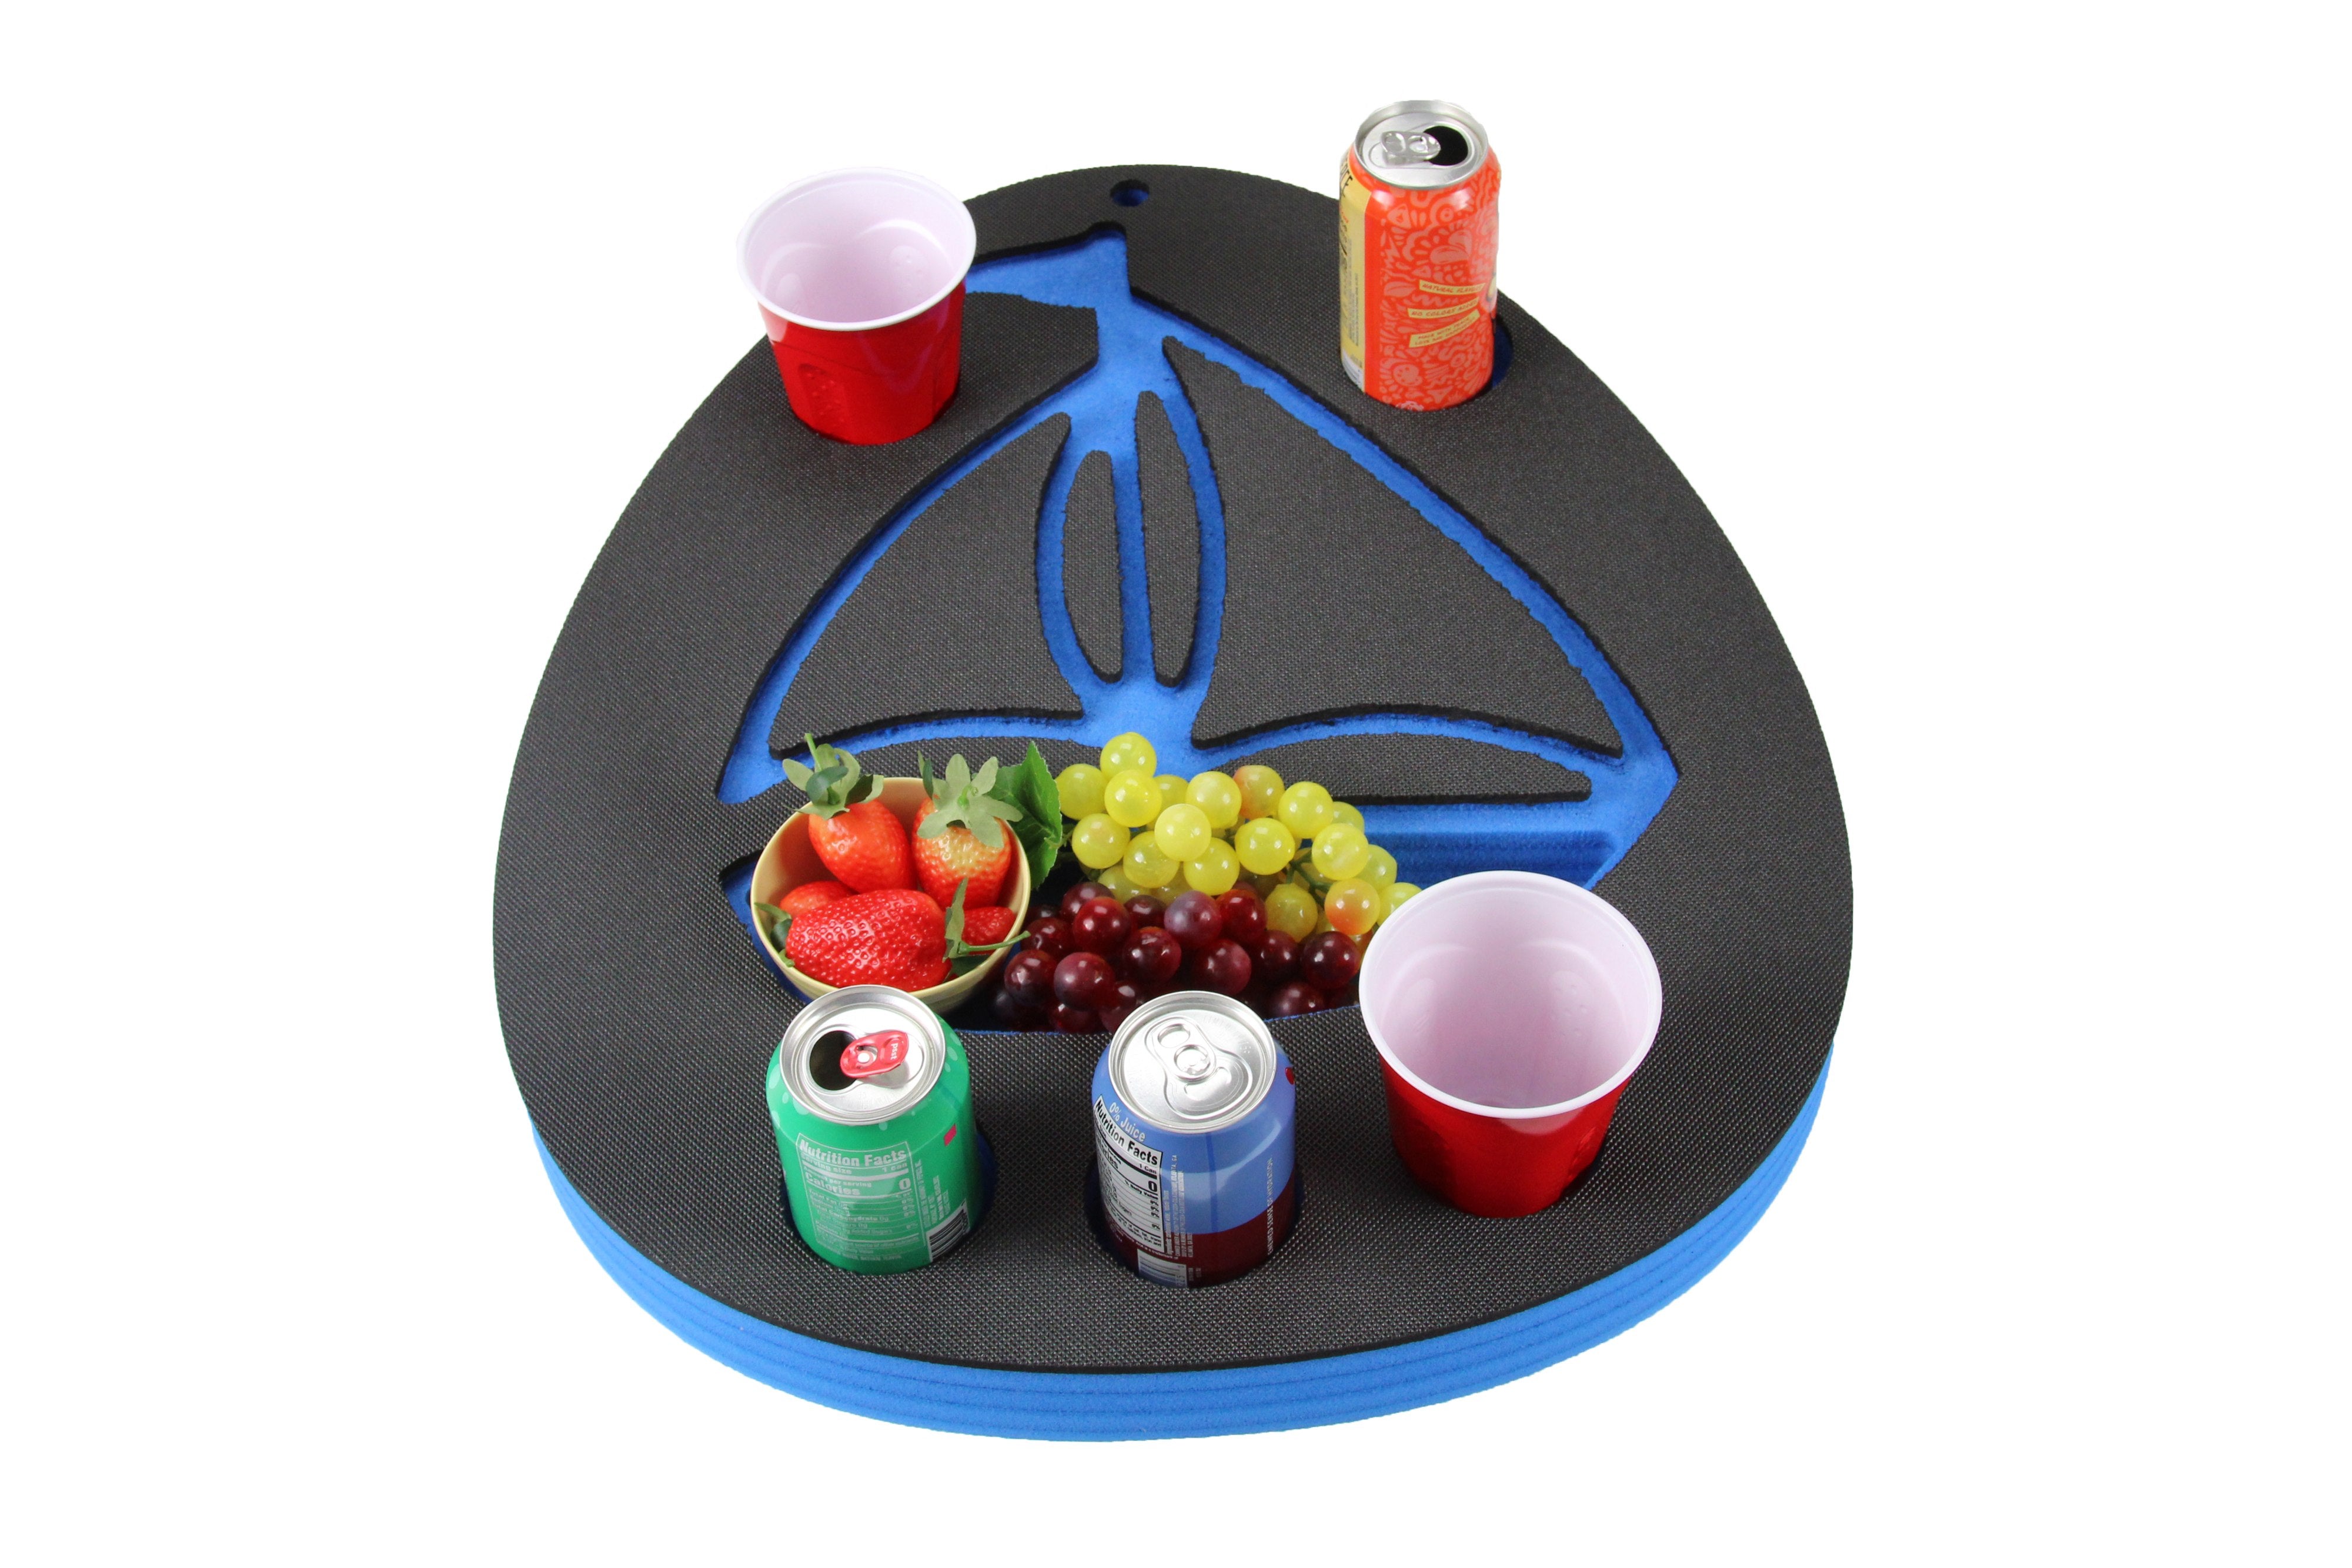 Sailboat Shaped Drink Holder Refreshment Table Tray PoolBeach Party Float Lounge Durable Foam 6 Compartment UV Resistant Cup Holders 24 Inches